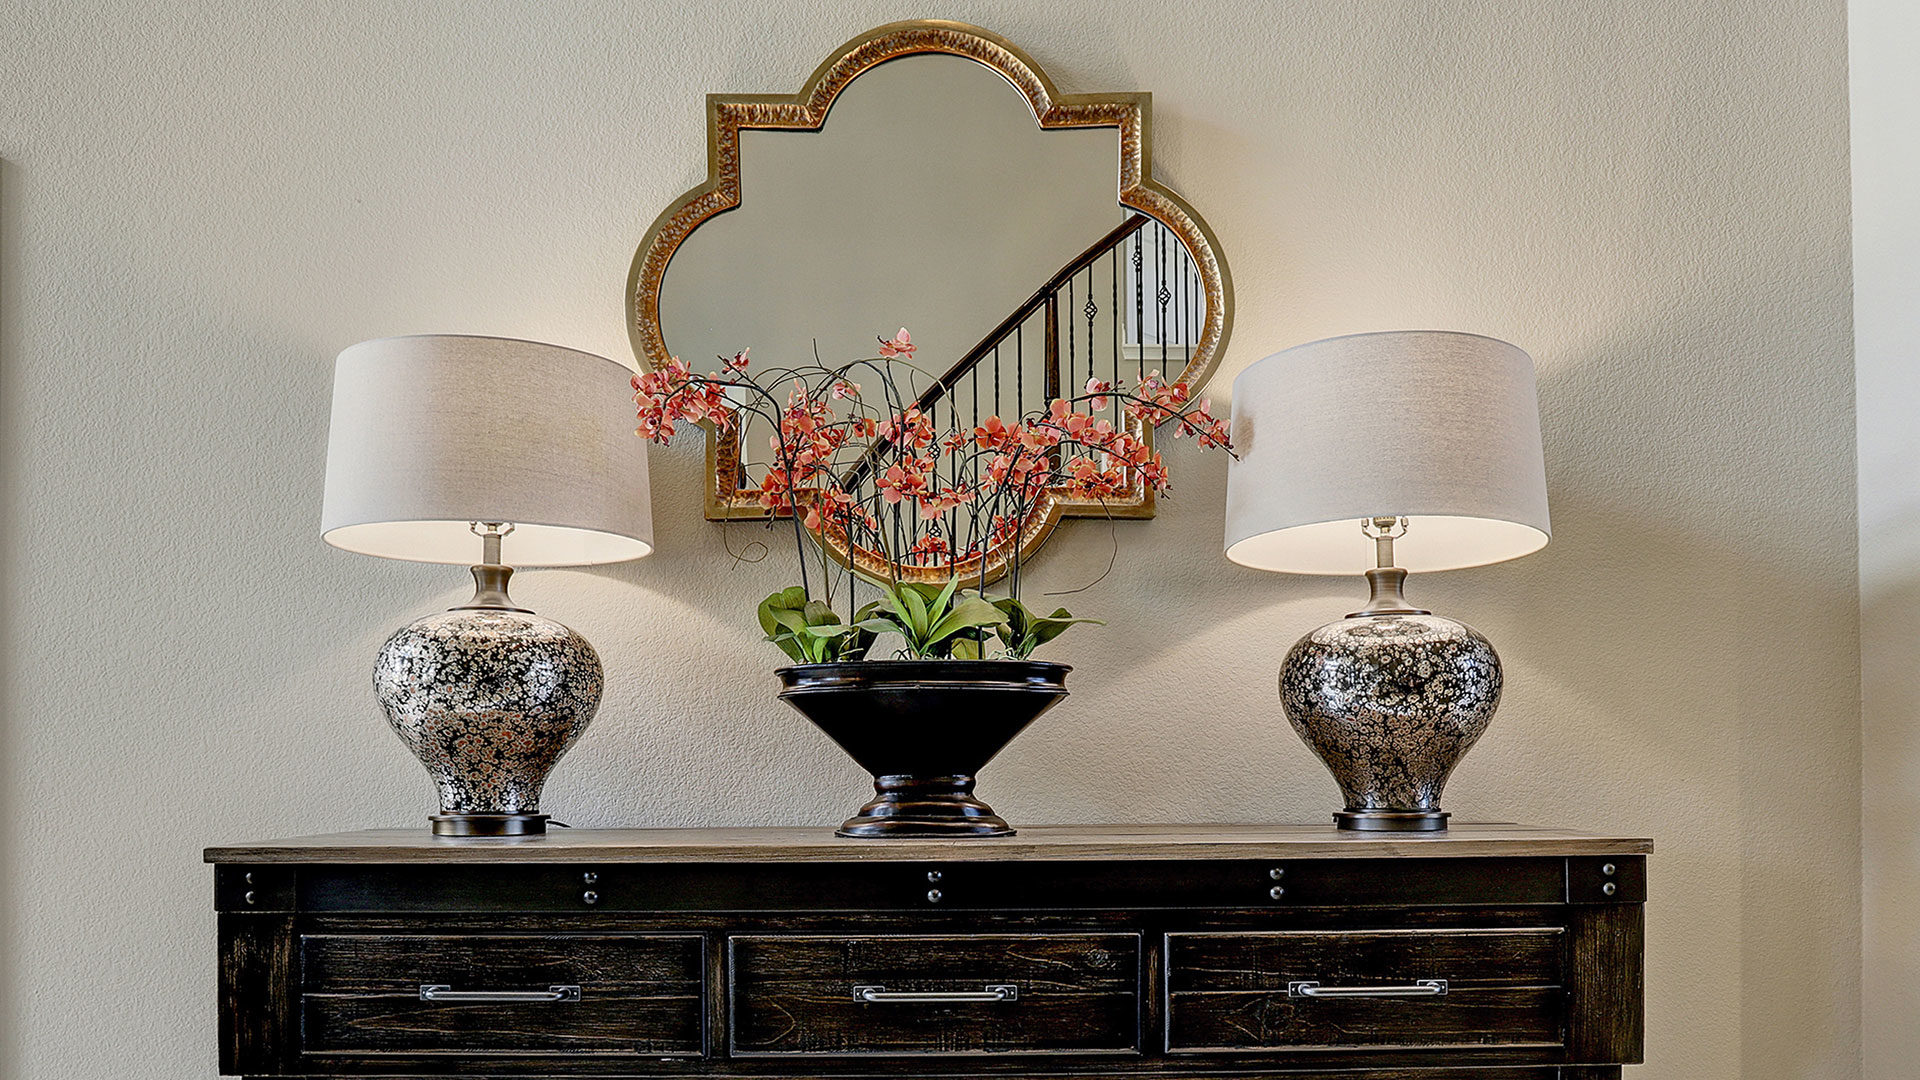 Tips for Accessorizing Your Home